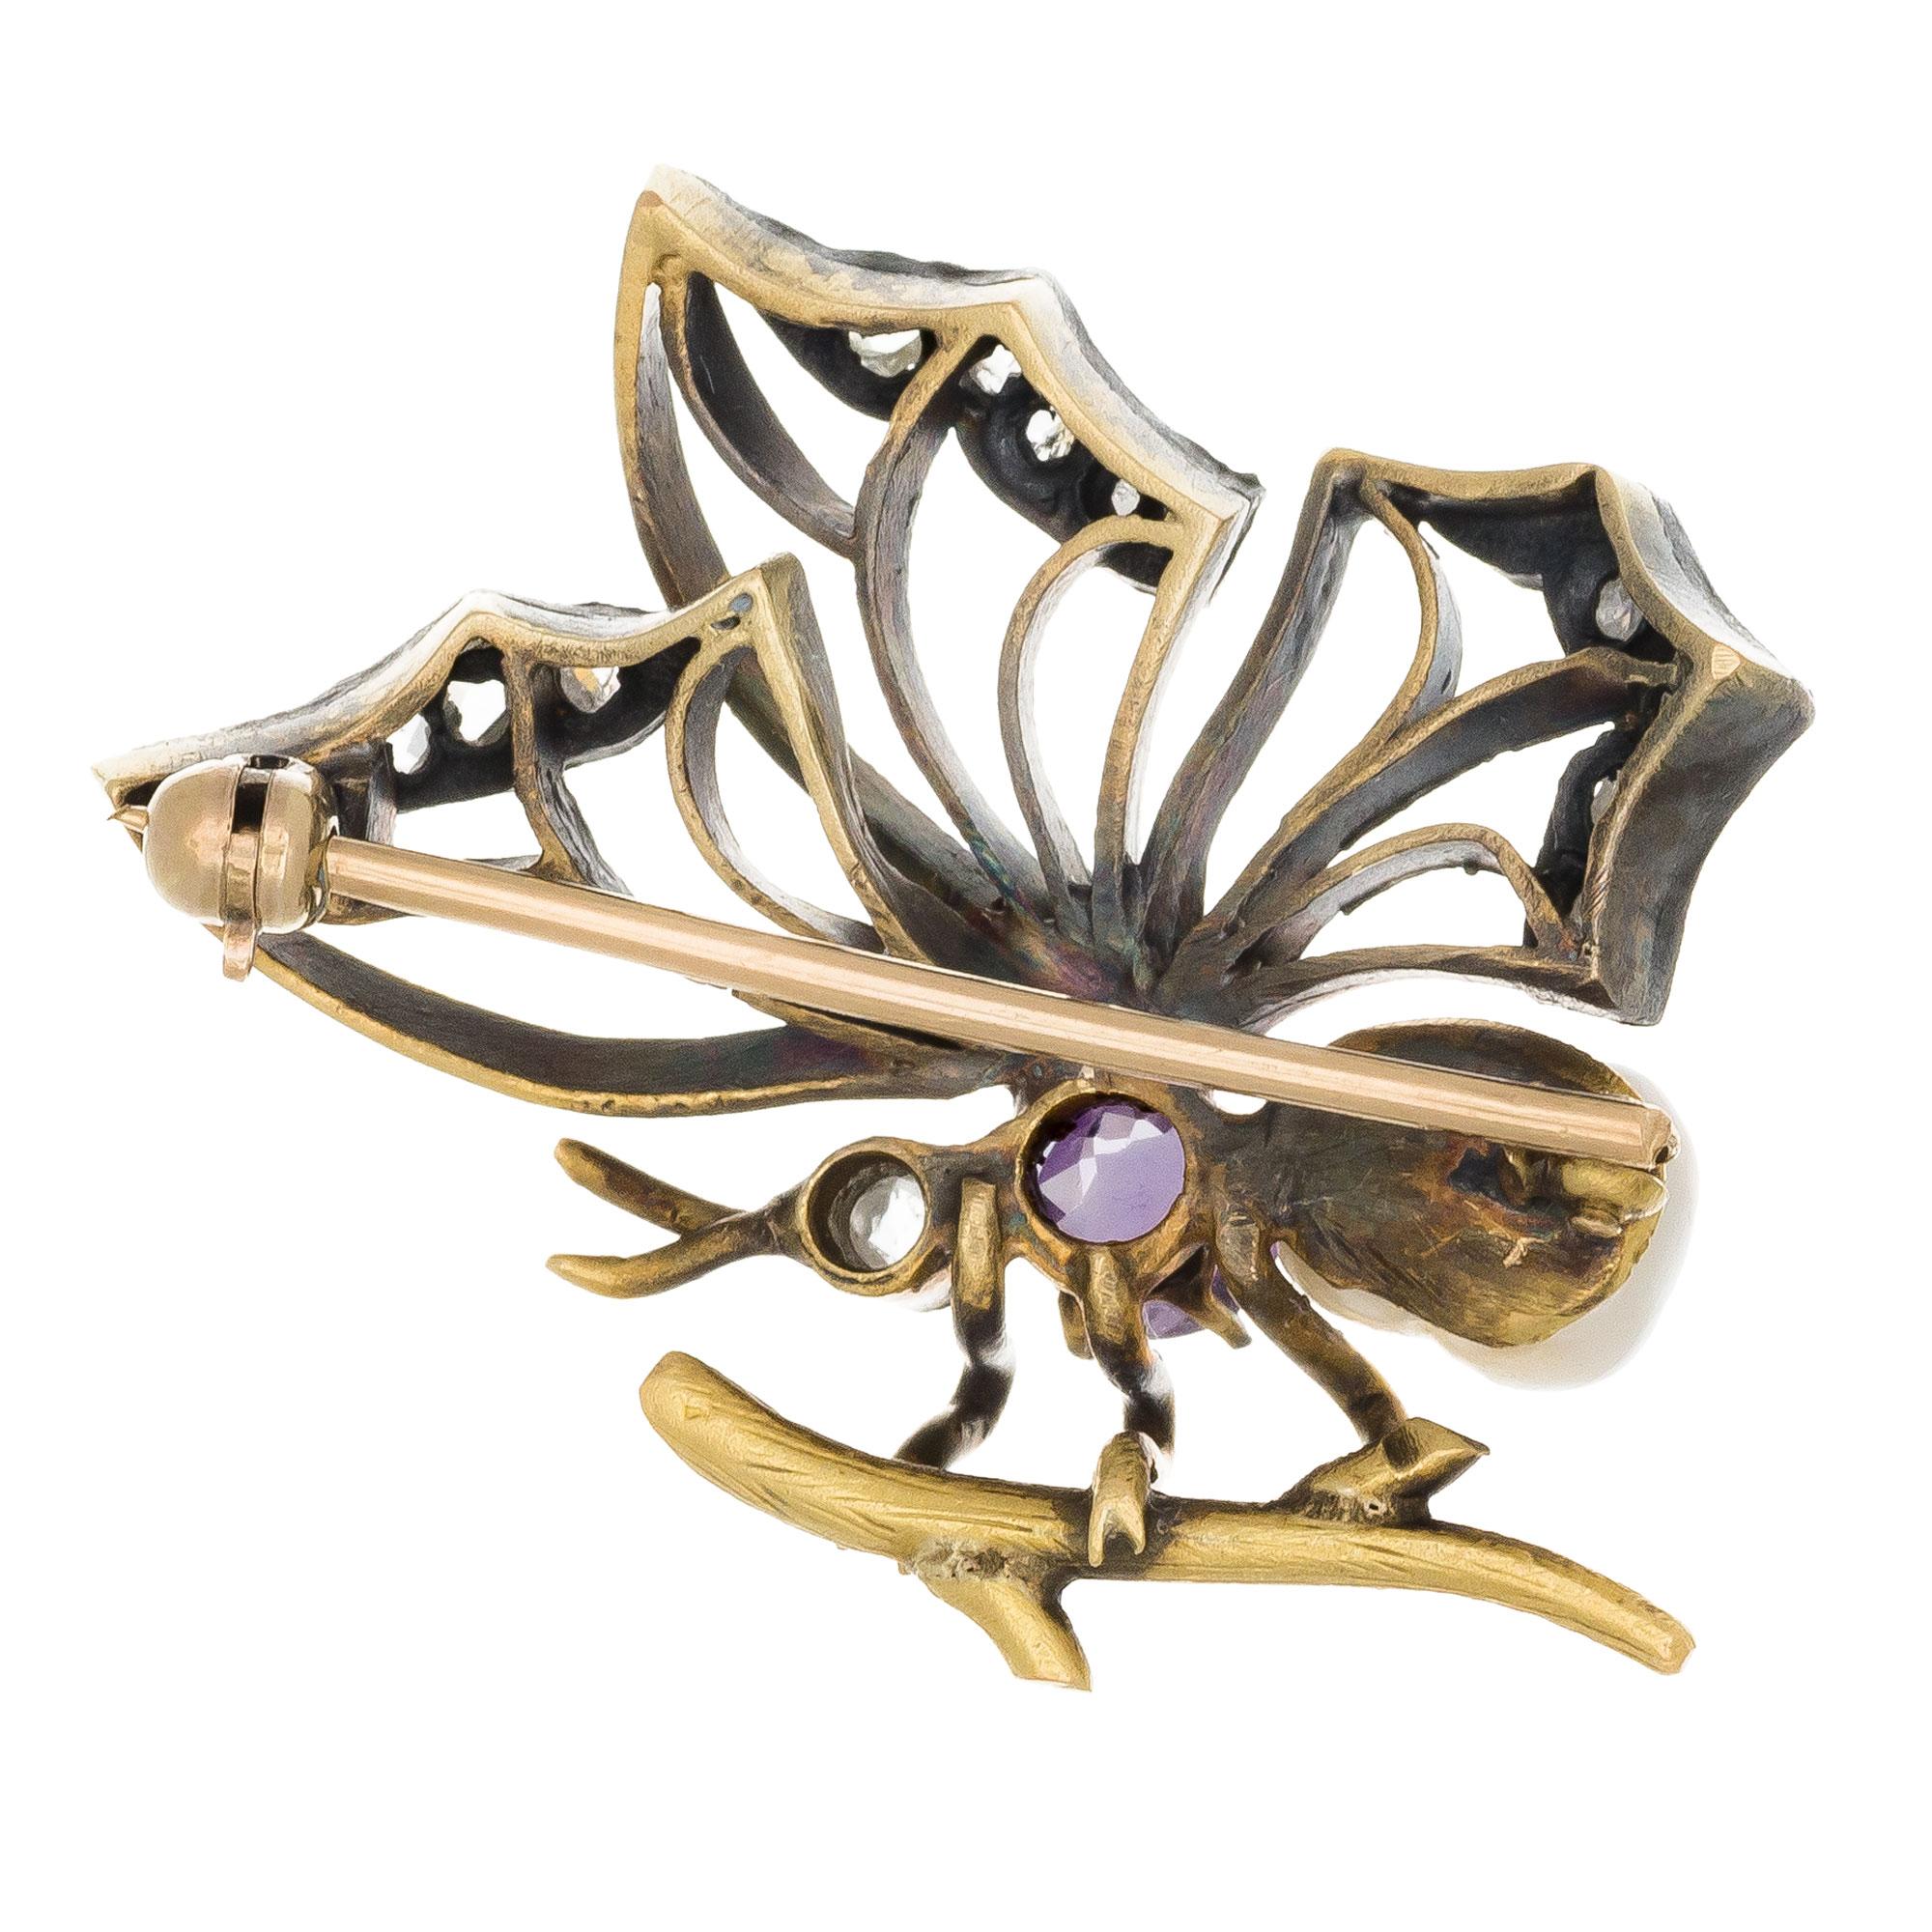 1910 Art Nouveau butterfly brooch. 18k yellow gold with silver tops set with 12 rose cut diamonds, Amethyst and a GIA certified natural untreated saltwater pearl. Natural patina

1 natural white saltwater baroque pearl, 6mm GIA Certificate #